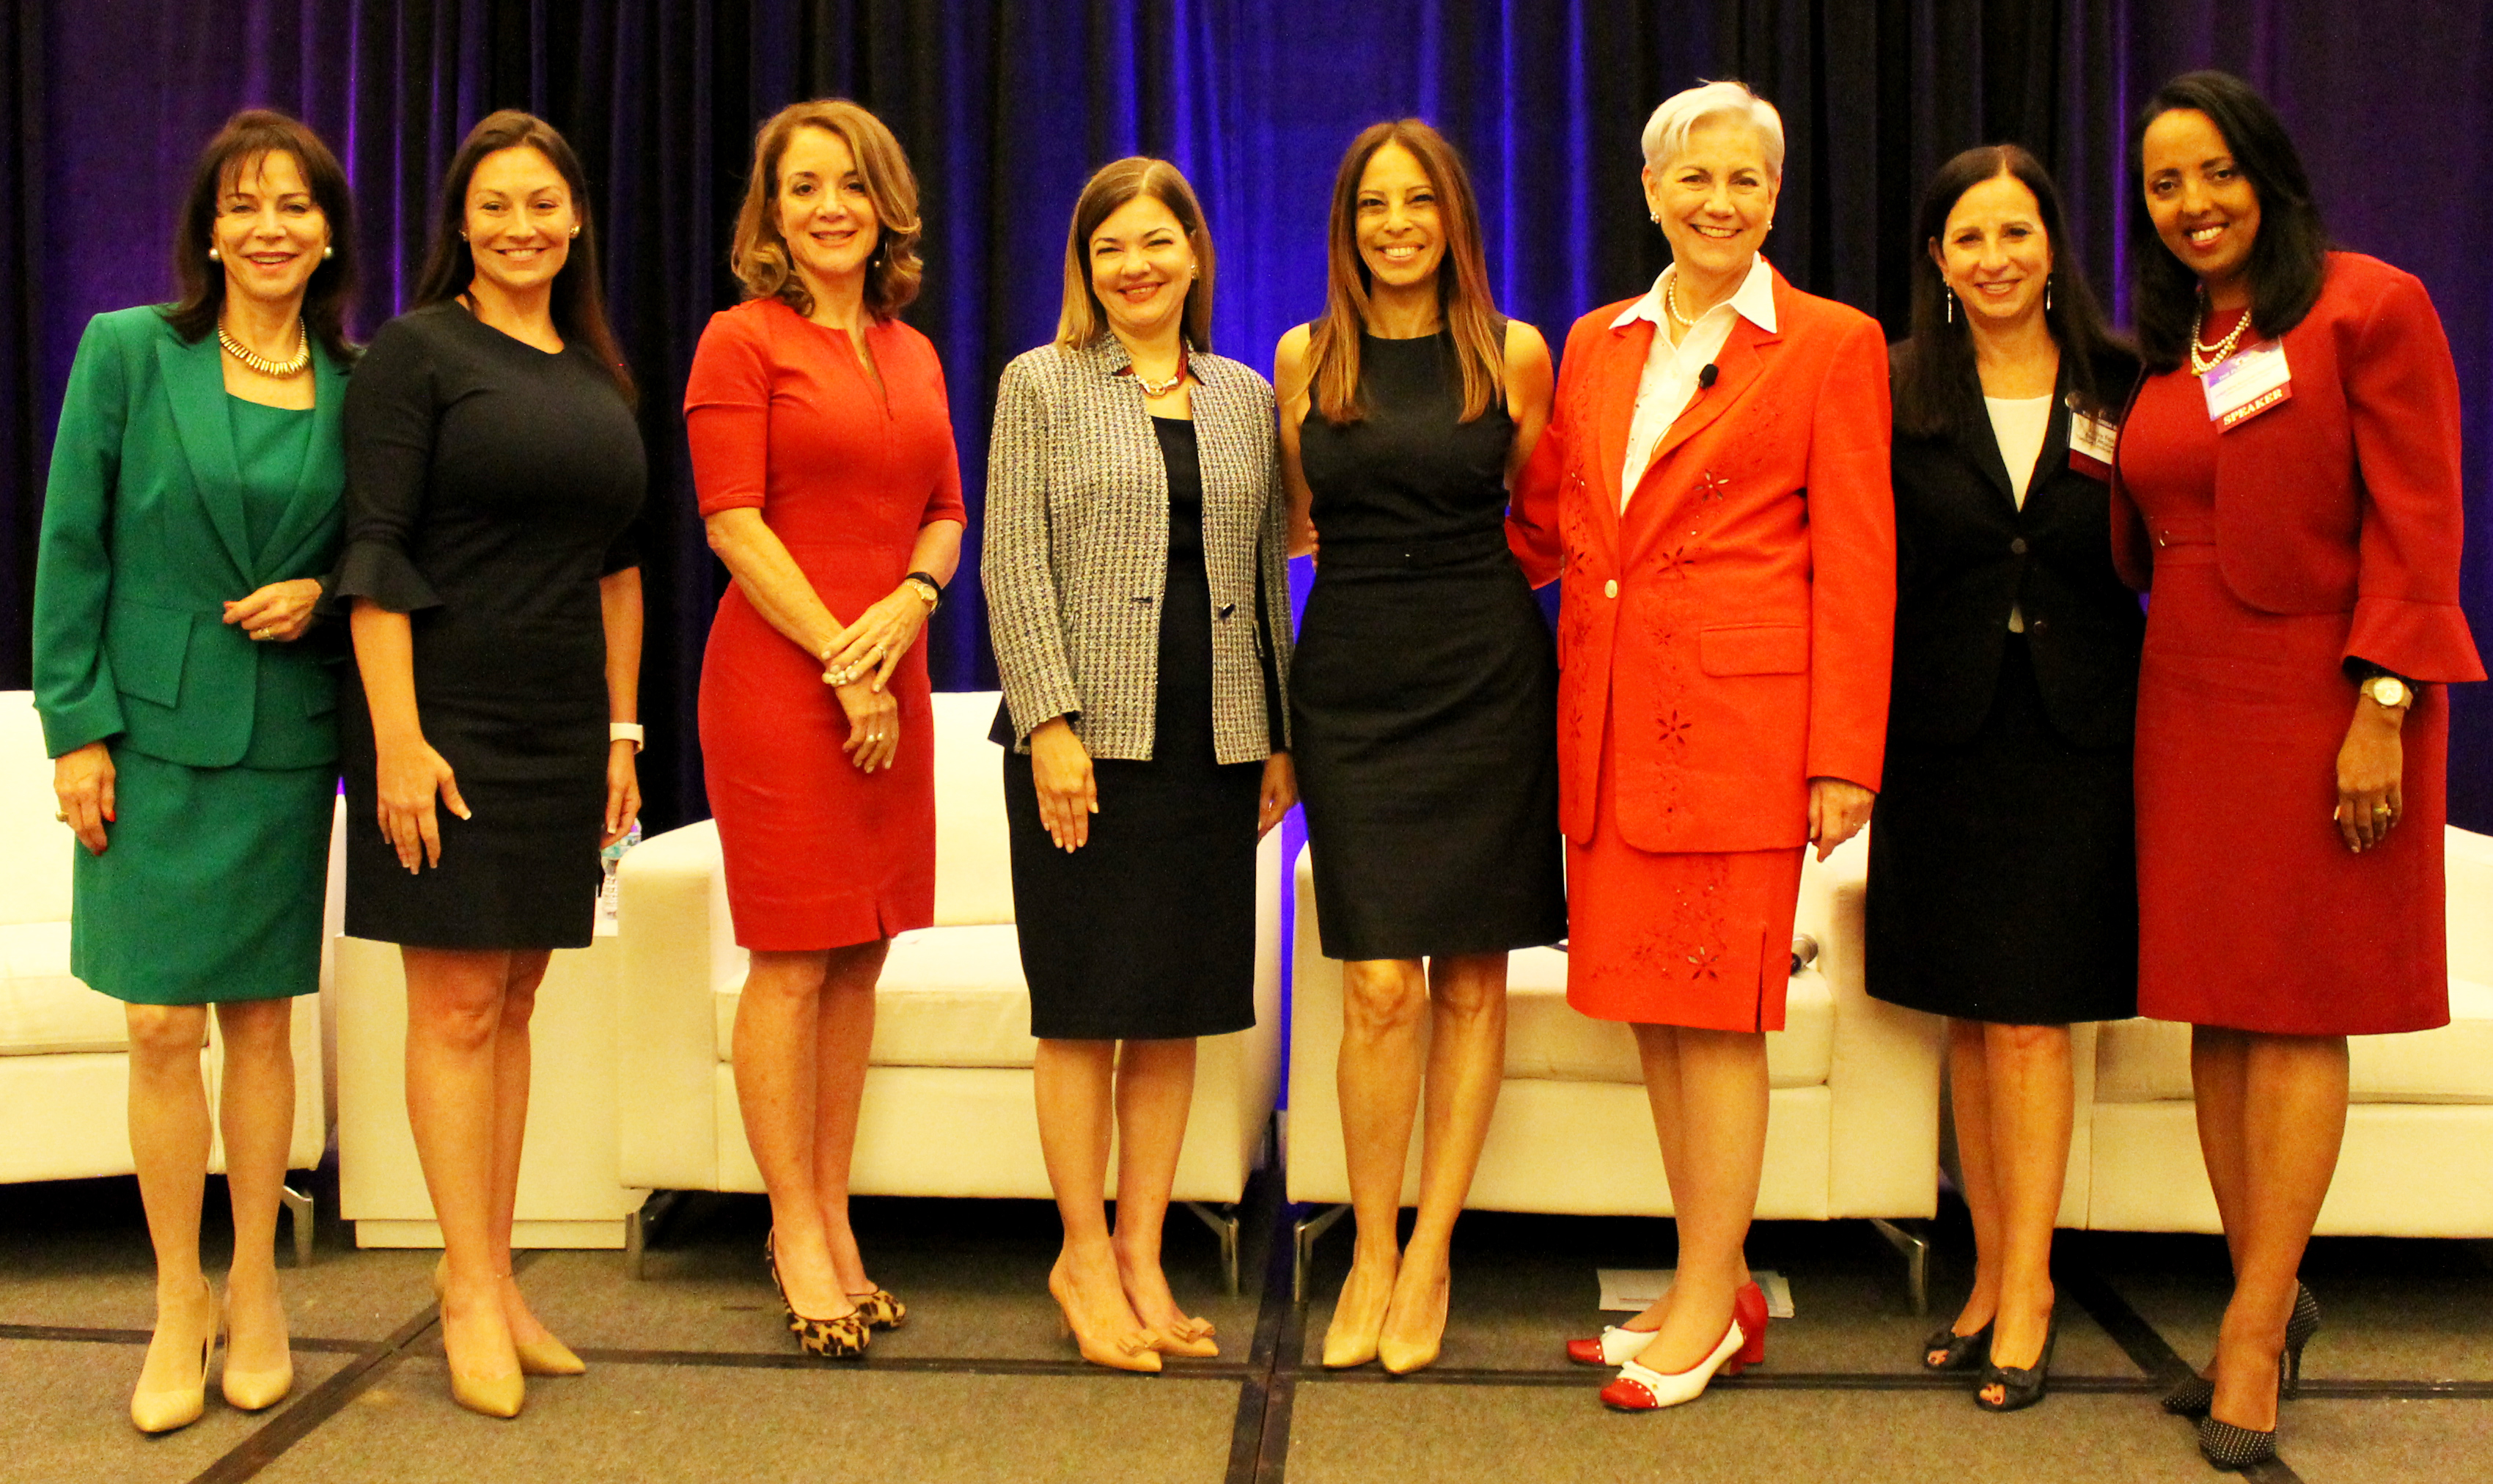 Michelle Suskauer posing for photo with group of women lawyers from the panel